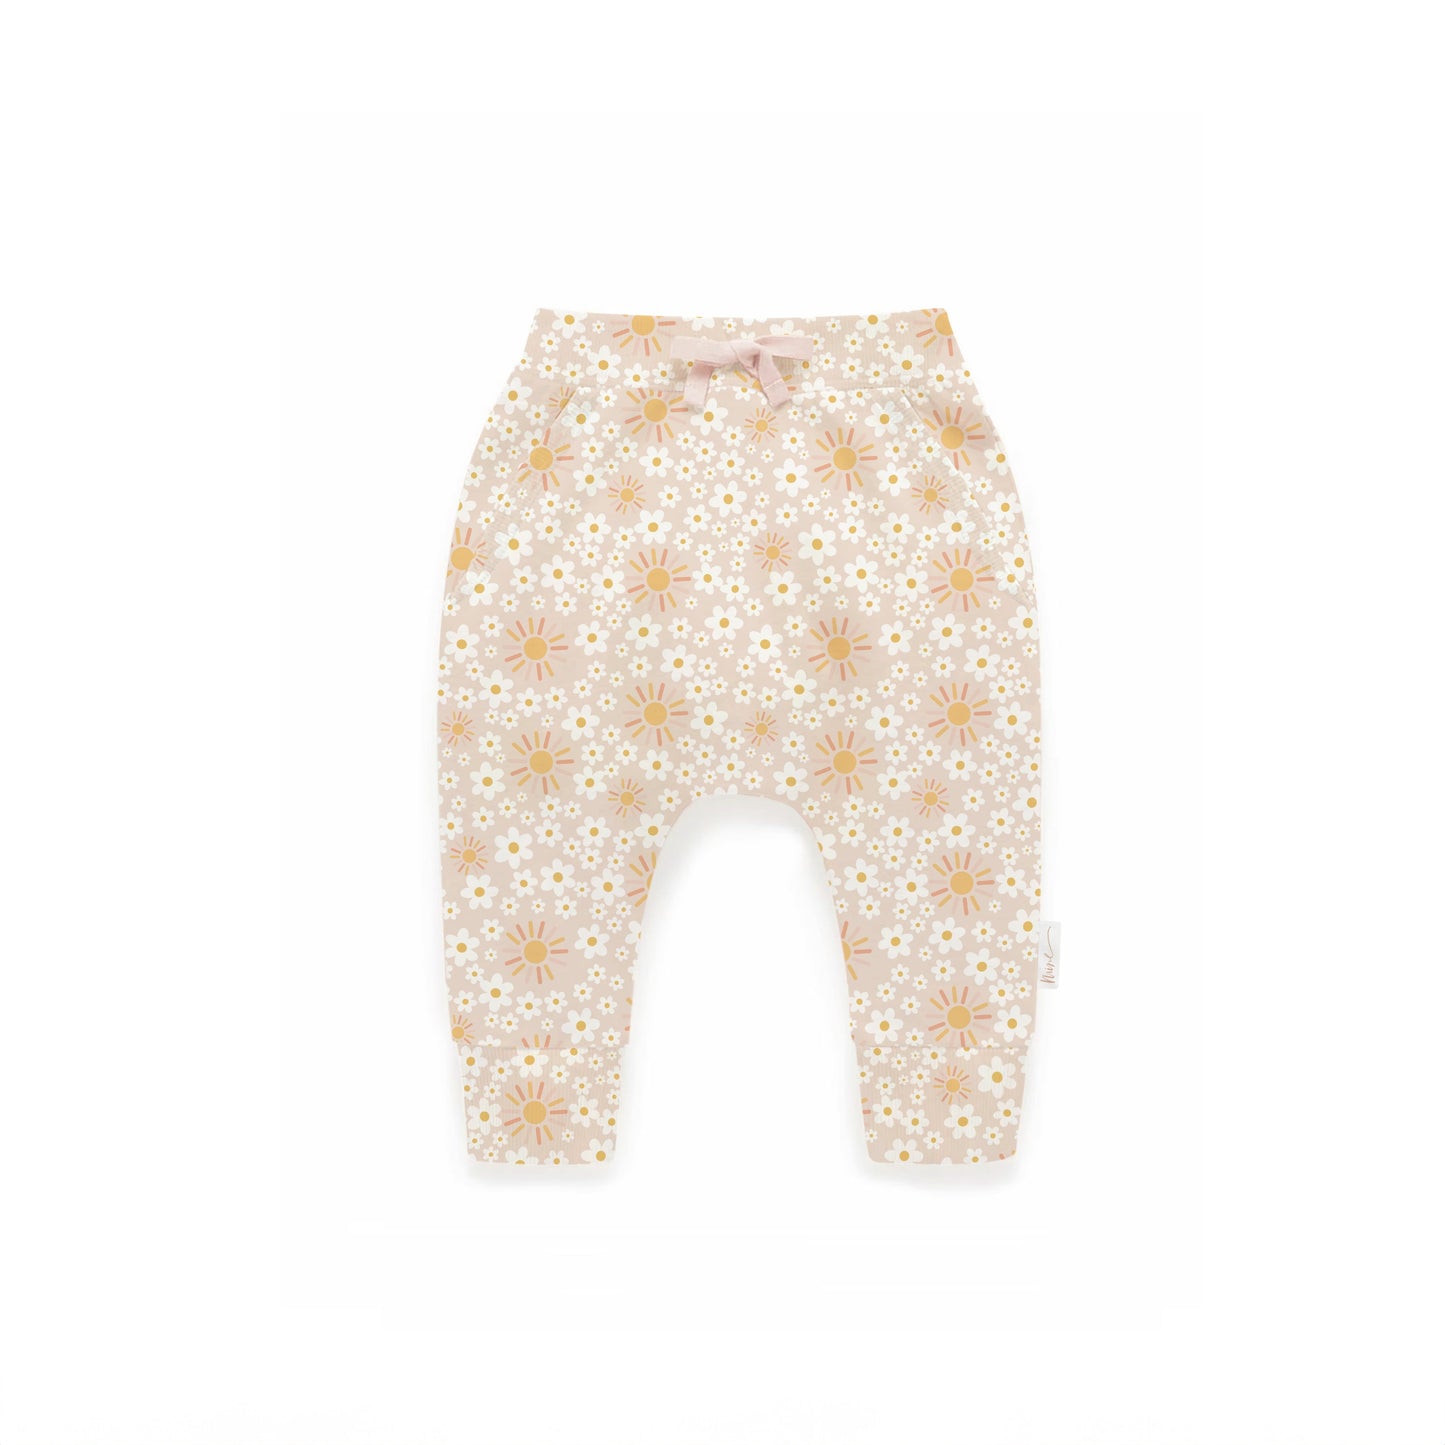 Slouch Pants - Ray of Sunshine